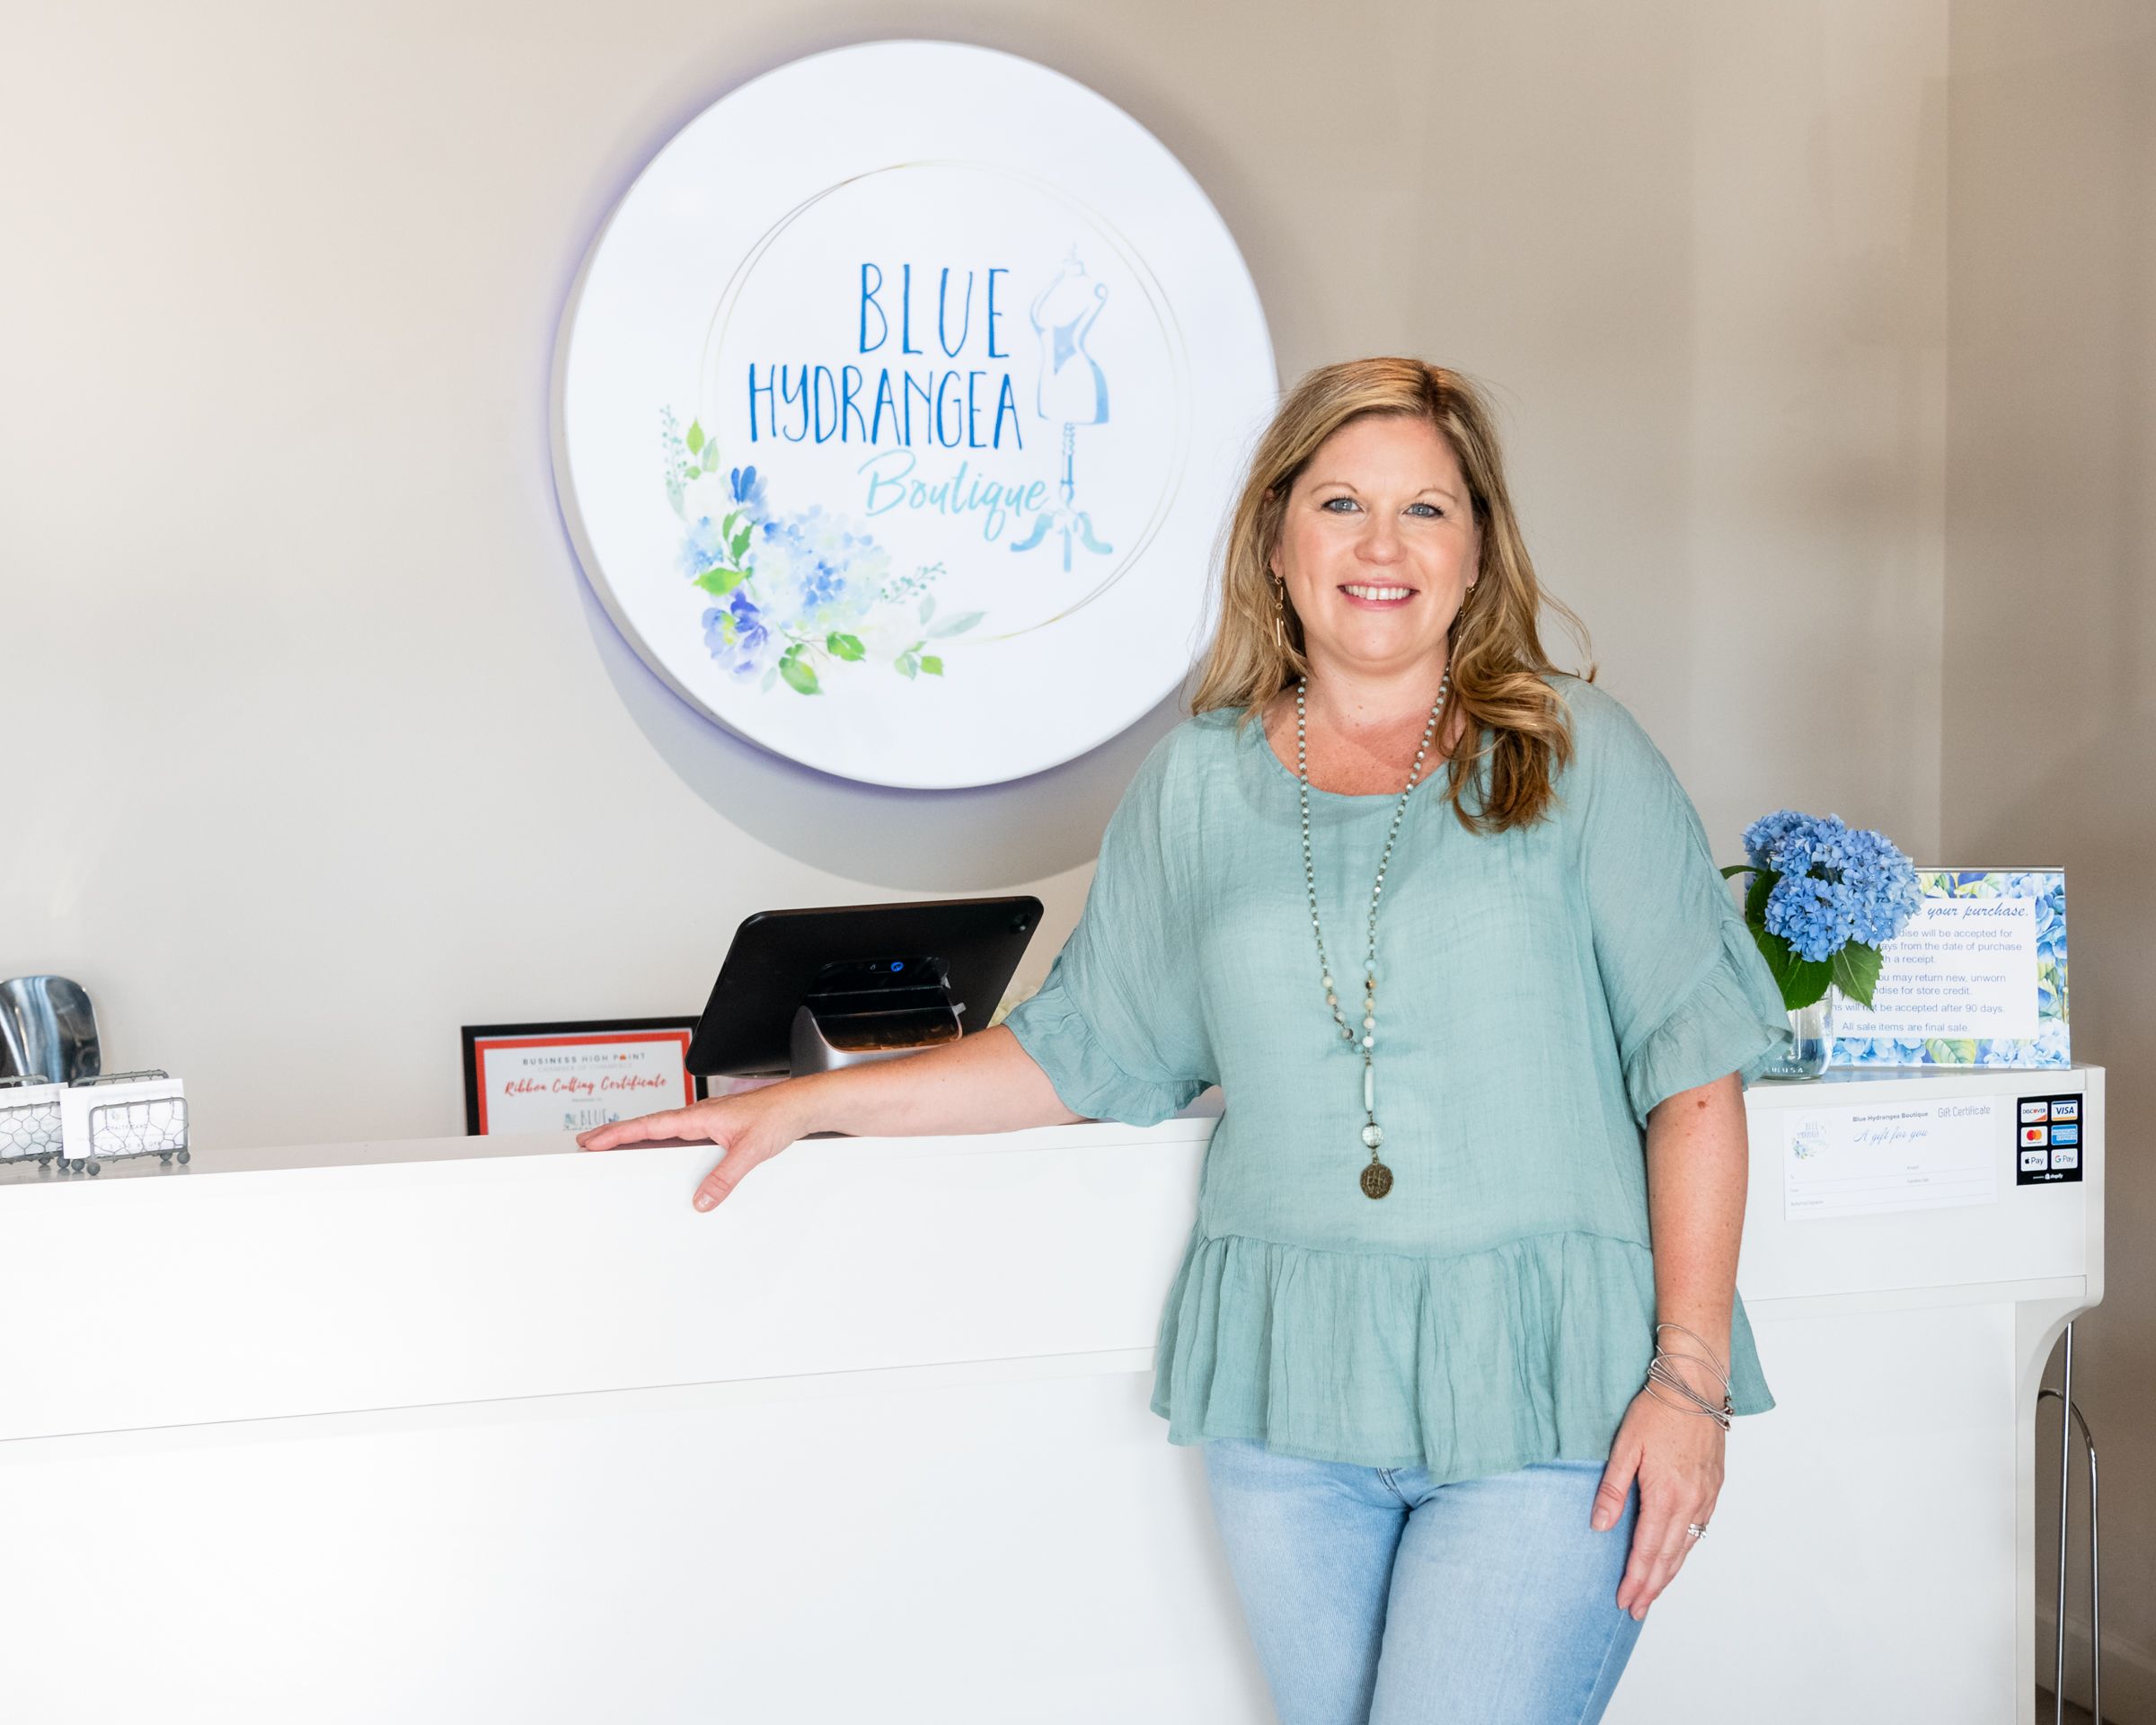 Elissa Porter, owner of Blue Hydrangea Boutique stands in front of her sign in her store in High Point, NC.